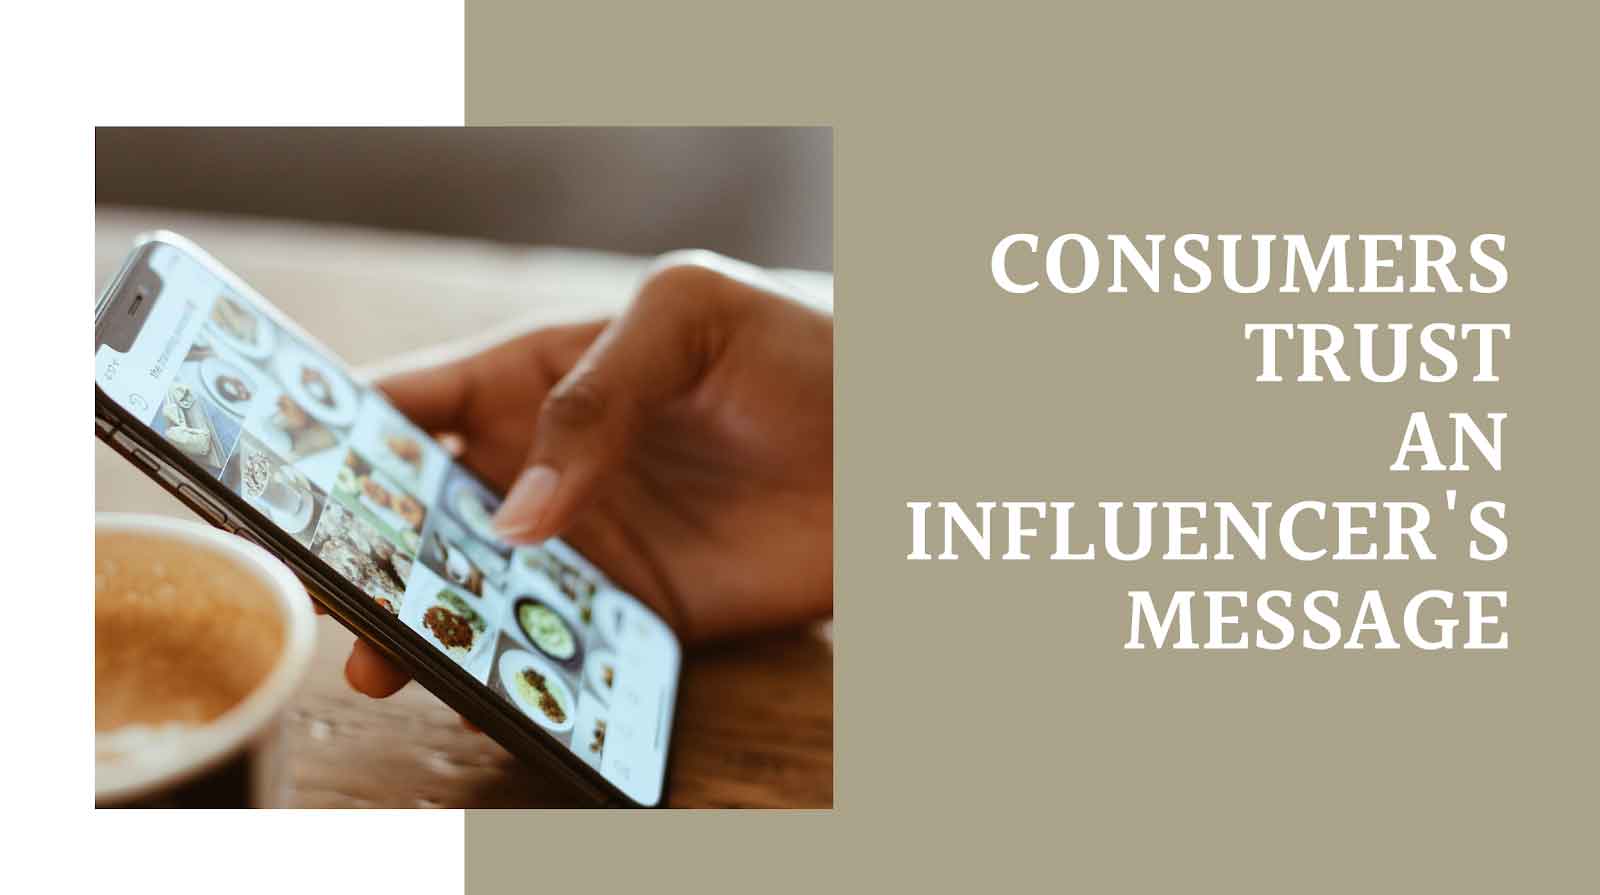 Consumers Trust An Influencers's Message